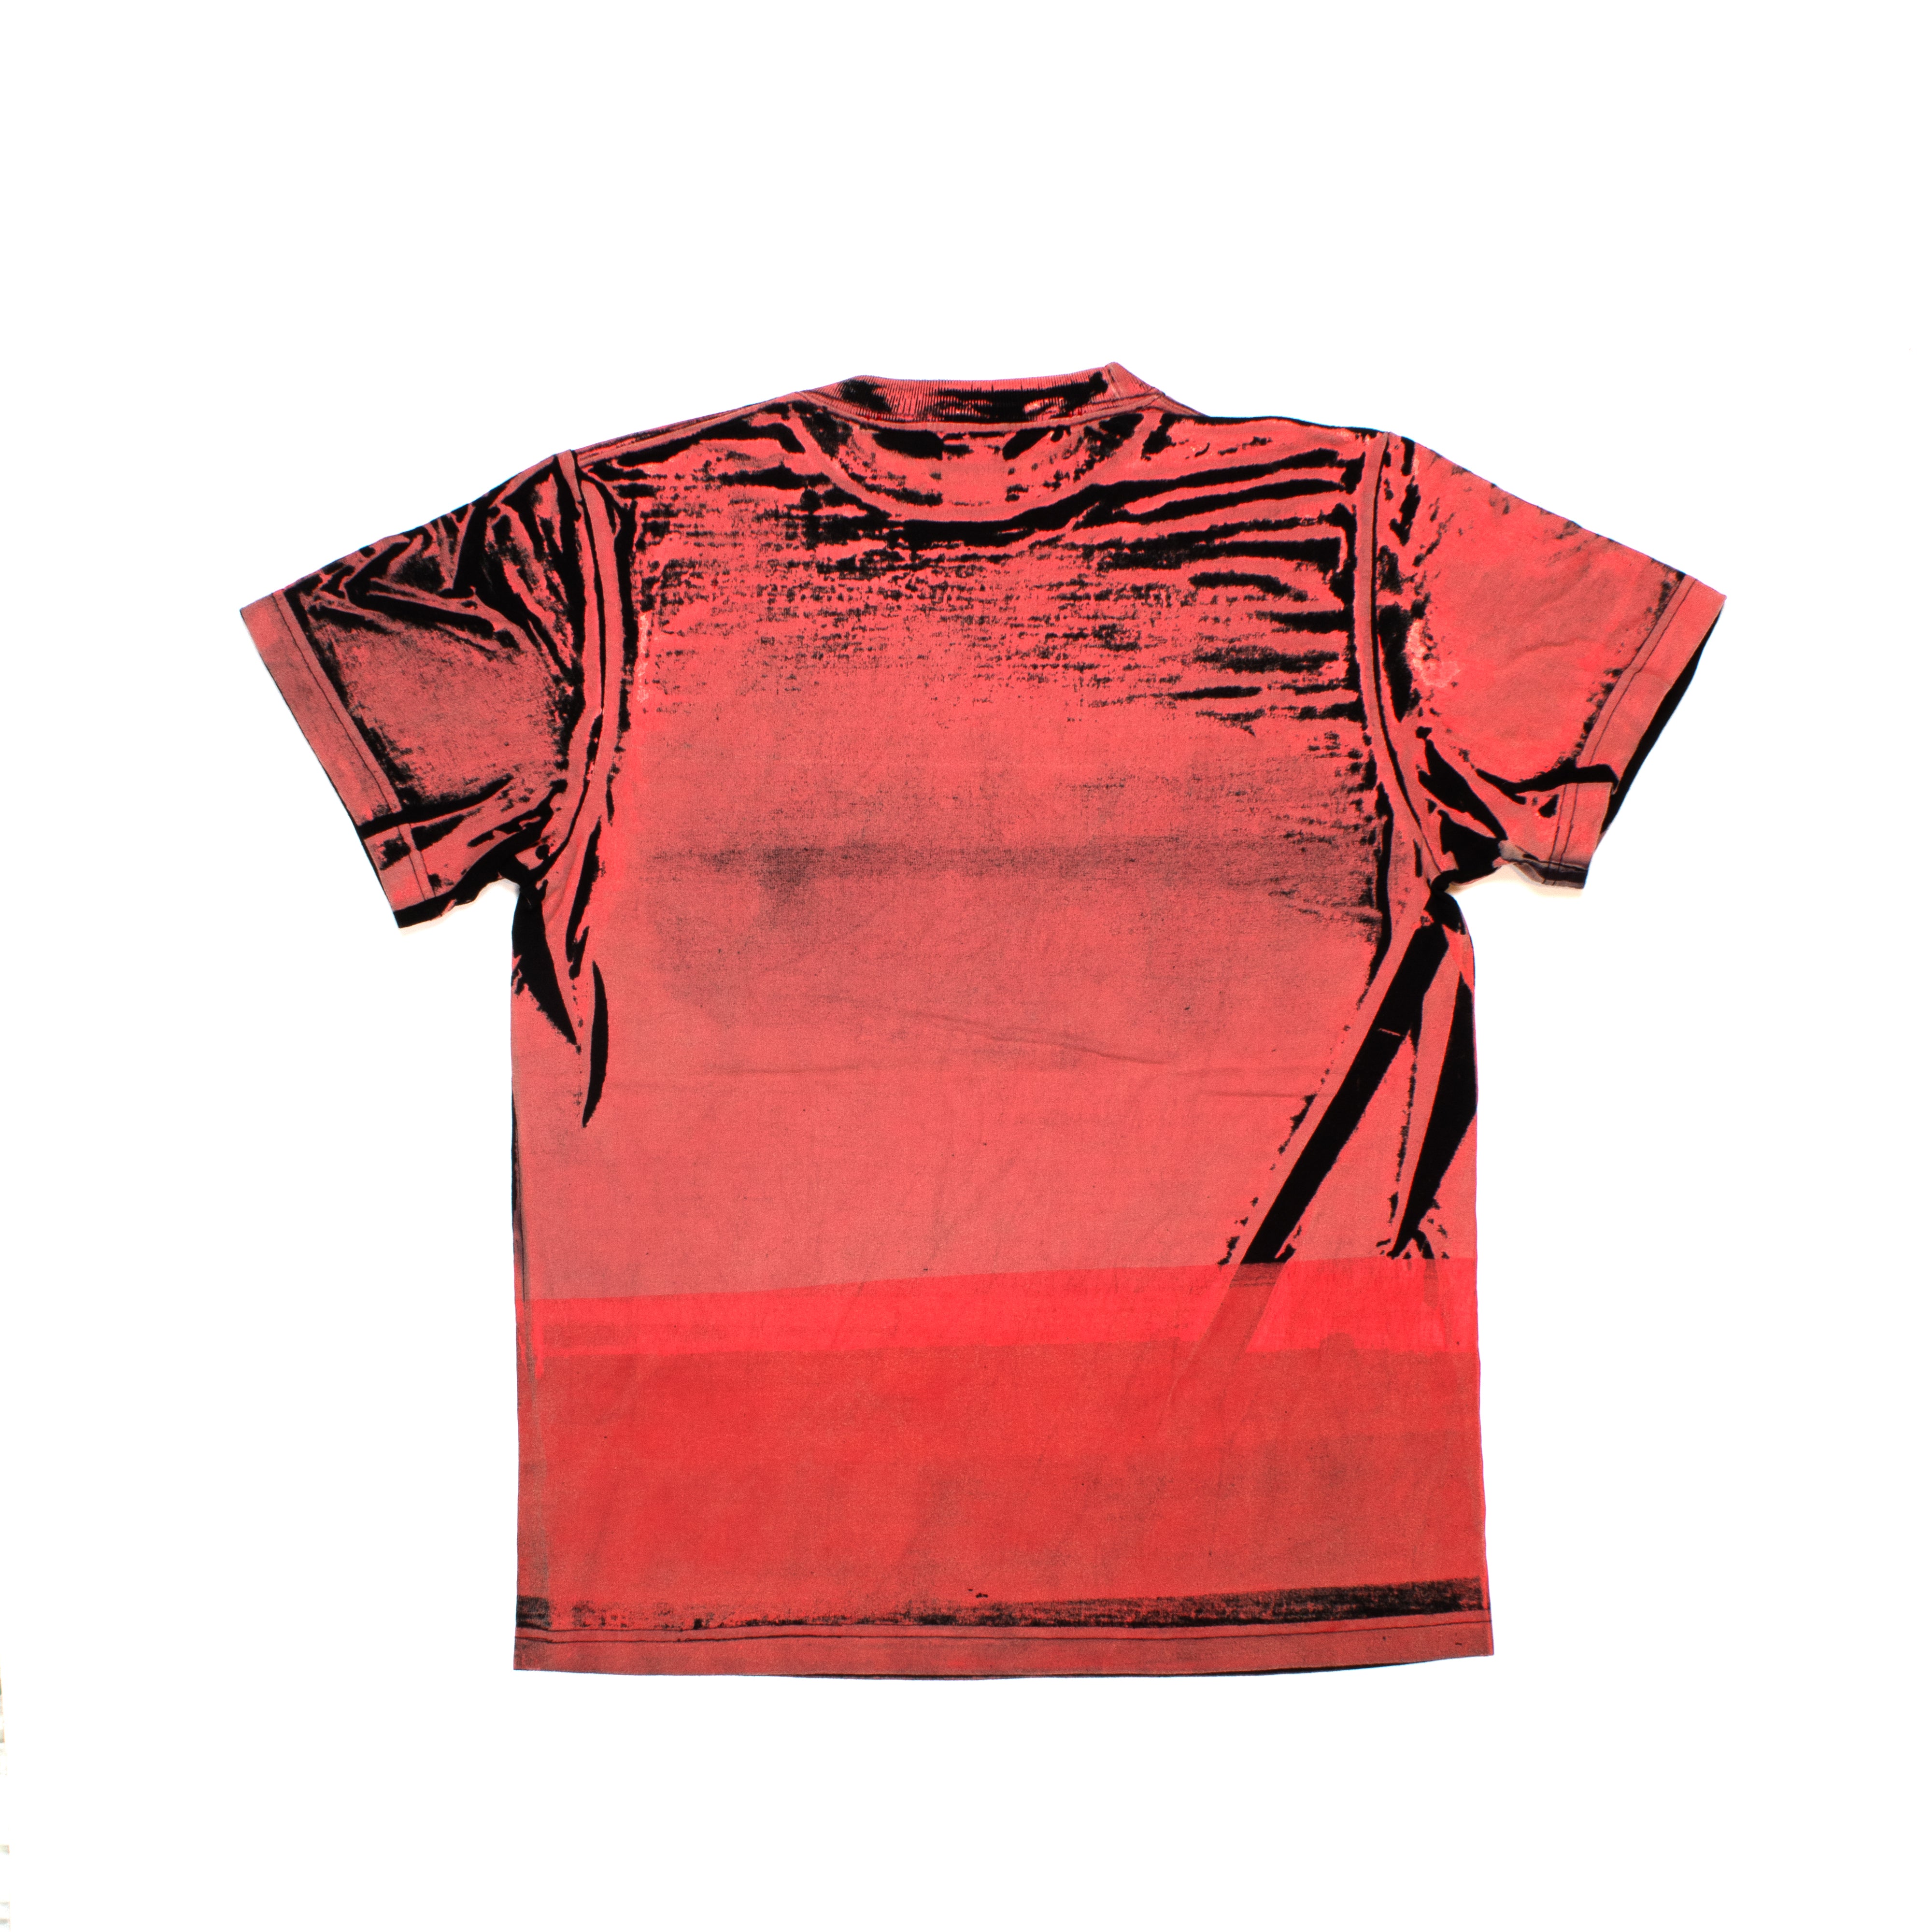 FILTH Red Printed Tee - 3 x 3